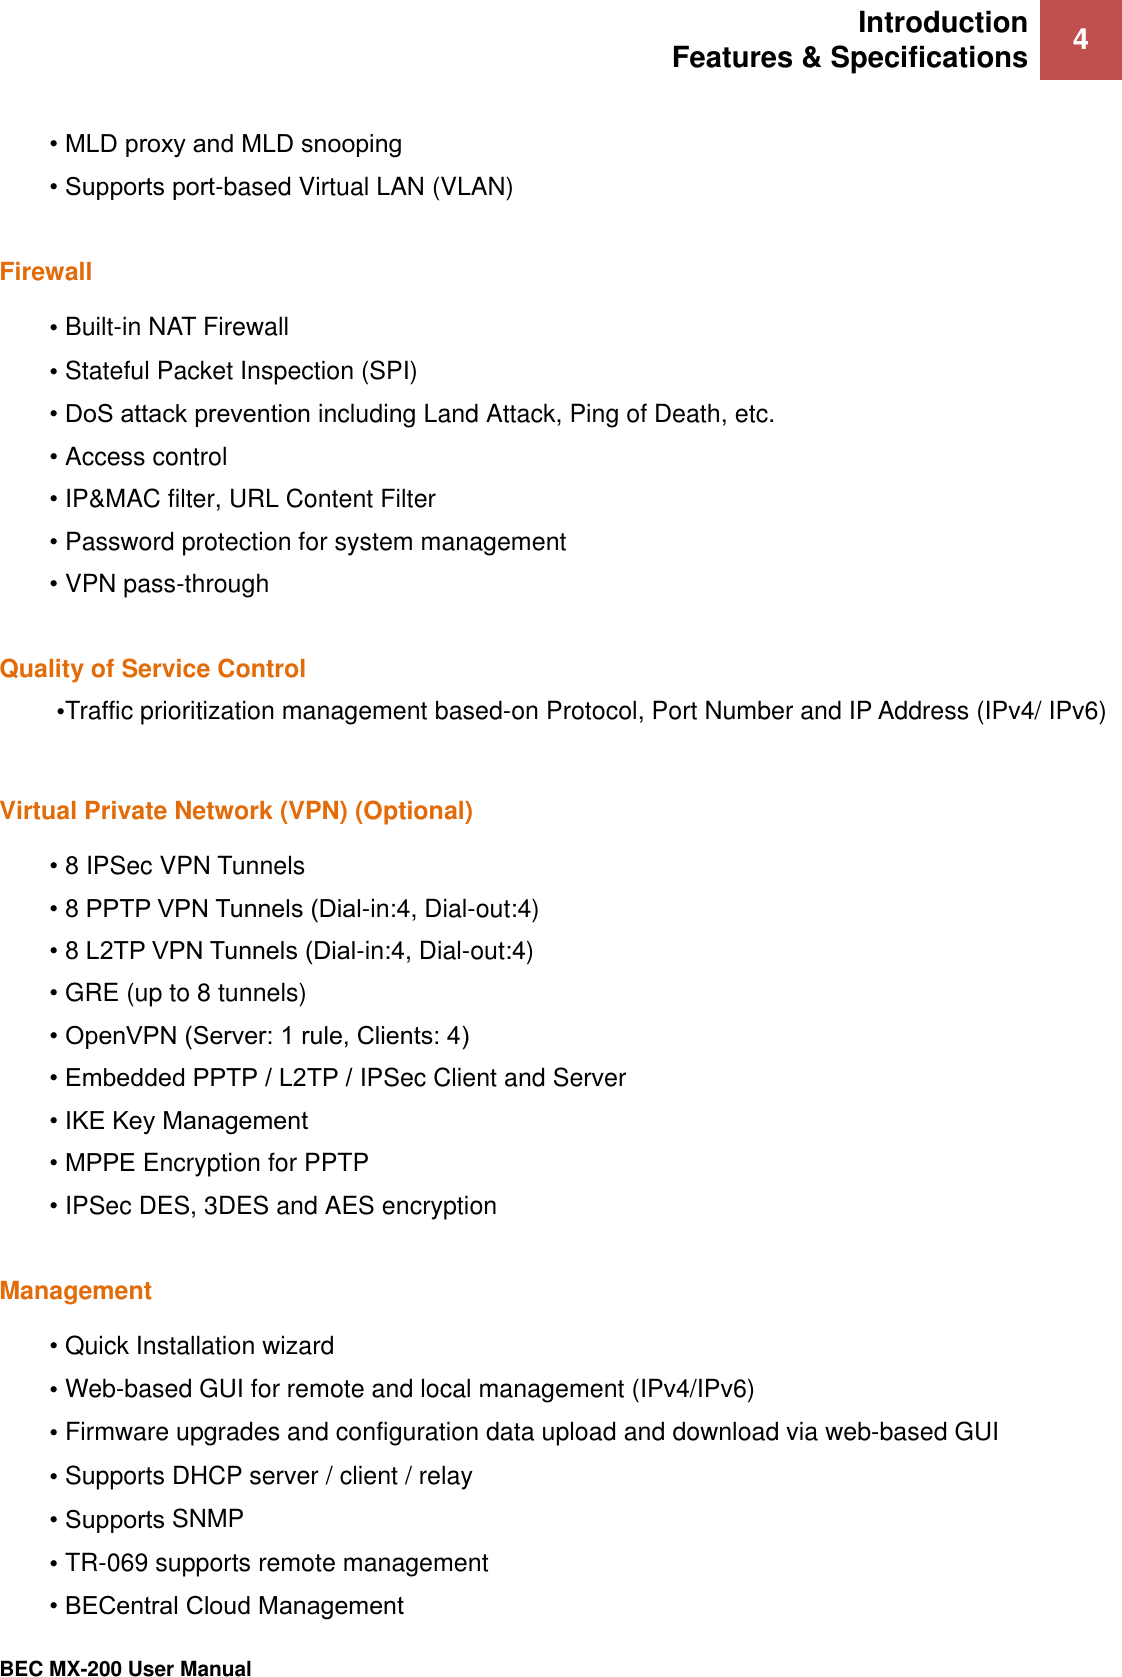 Introduction Features &amp; Specifications 4   BEC MX-200 User Manual  • MLD proxy and MLD snooping  • Supports port-based Virtual LAN (VLAN)  Firewall • Built-in NAT Firewall • Stateful Packet Inspection (SPI) • DoS attack prevention including Land Attack, Ping of Death, etc. • Access control • IP&amp;MAC filter, URL Content Filter  • Password protection for system management • VPN pass-through  Quality of Service Control •Traffic prioritization management based-on Protocol, Port Number and IP Address (IPv4/ IPv6)  Virtual Private Network (VPN) (Optional) • 8 IPSec VPN Tunnels • 8 PPTP VPN Tunnels (Dial-in:4, Dial-out:4) • 8 L2TP VPN Tunnels (Dial-in:4, Dial-out:4) • GRE (up to 8 tunnels) • OpenVPN (Server: 1 rule, Clients: 4) • Embedded PPTP / L2TP / IPSec Client and Server • IKE Key Management • MPPE Encryption for PPTP • IPSec DES, 3DES and AES encryption  Management • Quick Installation wizard • Web-based GUI for remote and local management (IPv4/IPv6) • Firmware upgrades and configuration data upload and download via web-based GUI • Supports DHCP server / client / relay • Supports SNMP  • TR-069 supports remote management • BECentral Cloud Management  